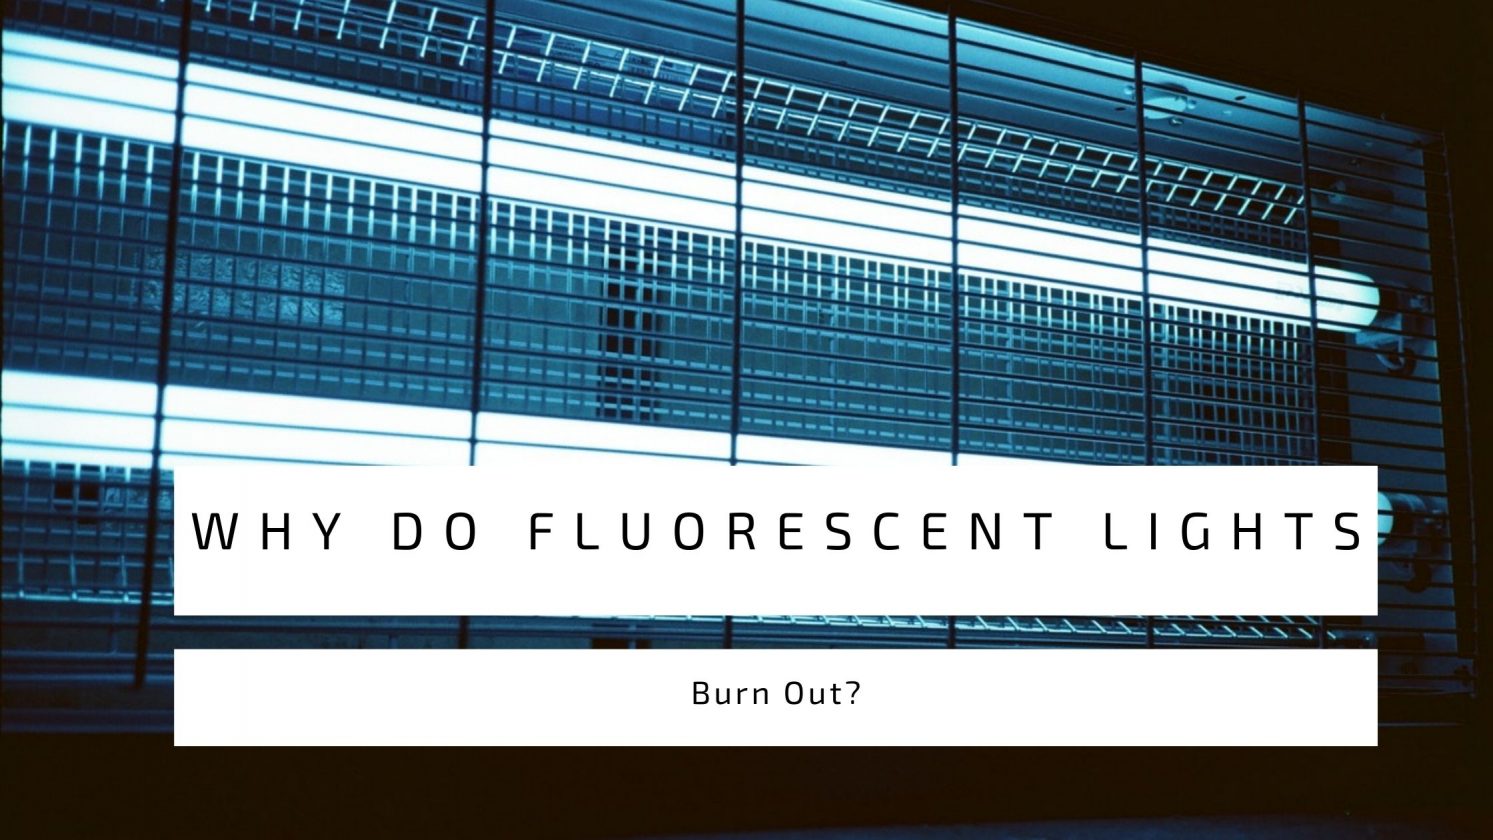 Why Do Fluorescent Lights Burn Out?